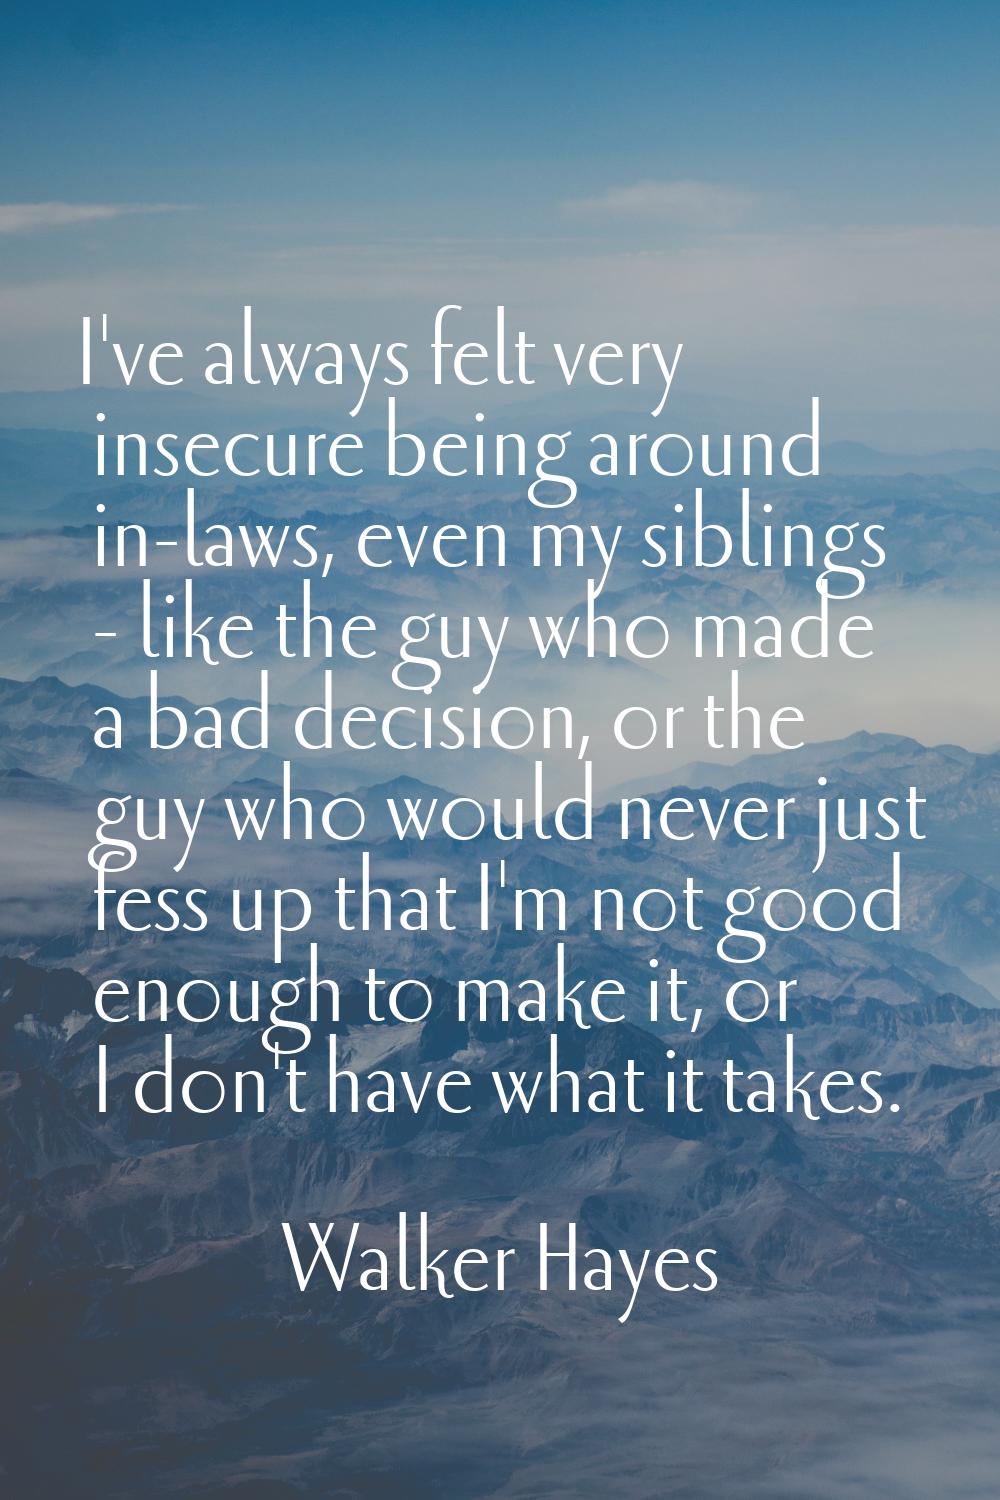 I've always felt very insecure being around in-laws, even my siblings - like the guy who made a bad